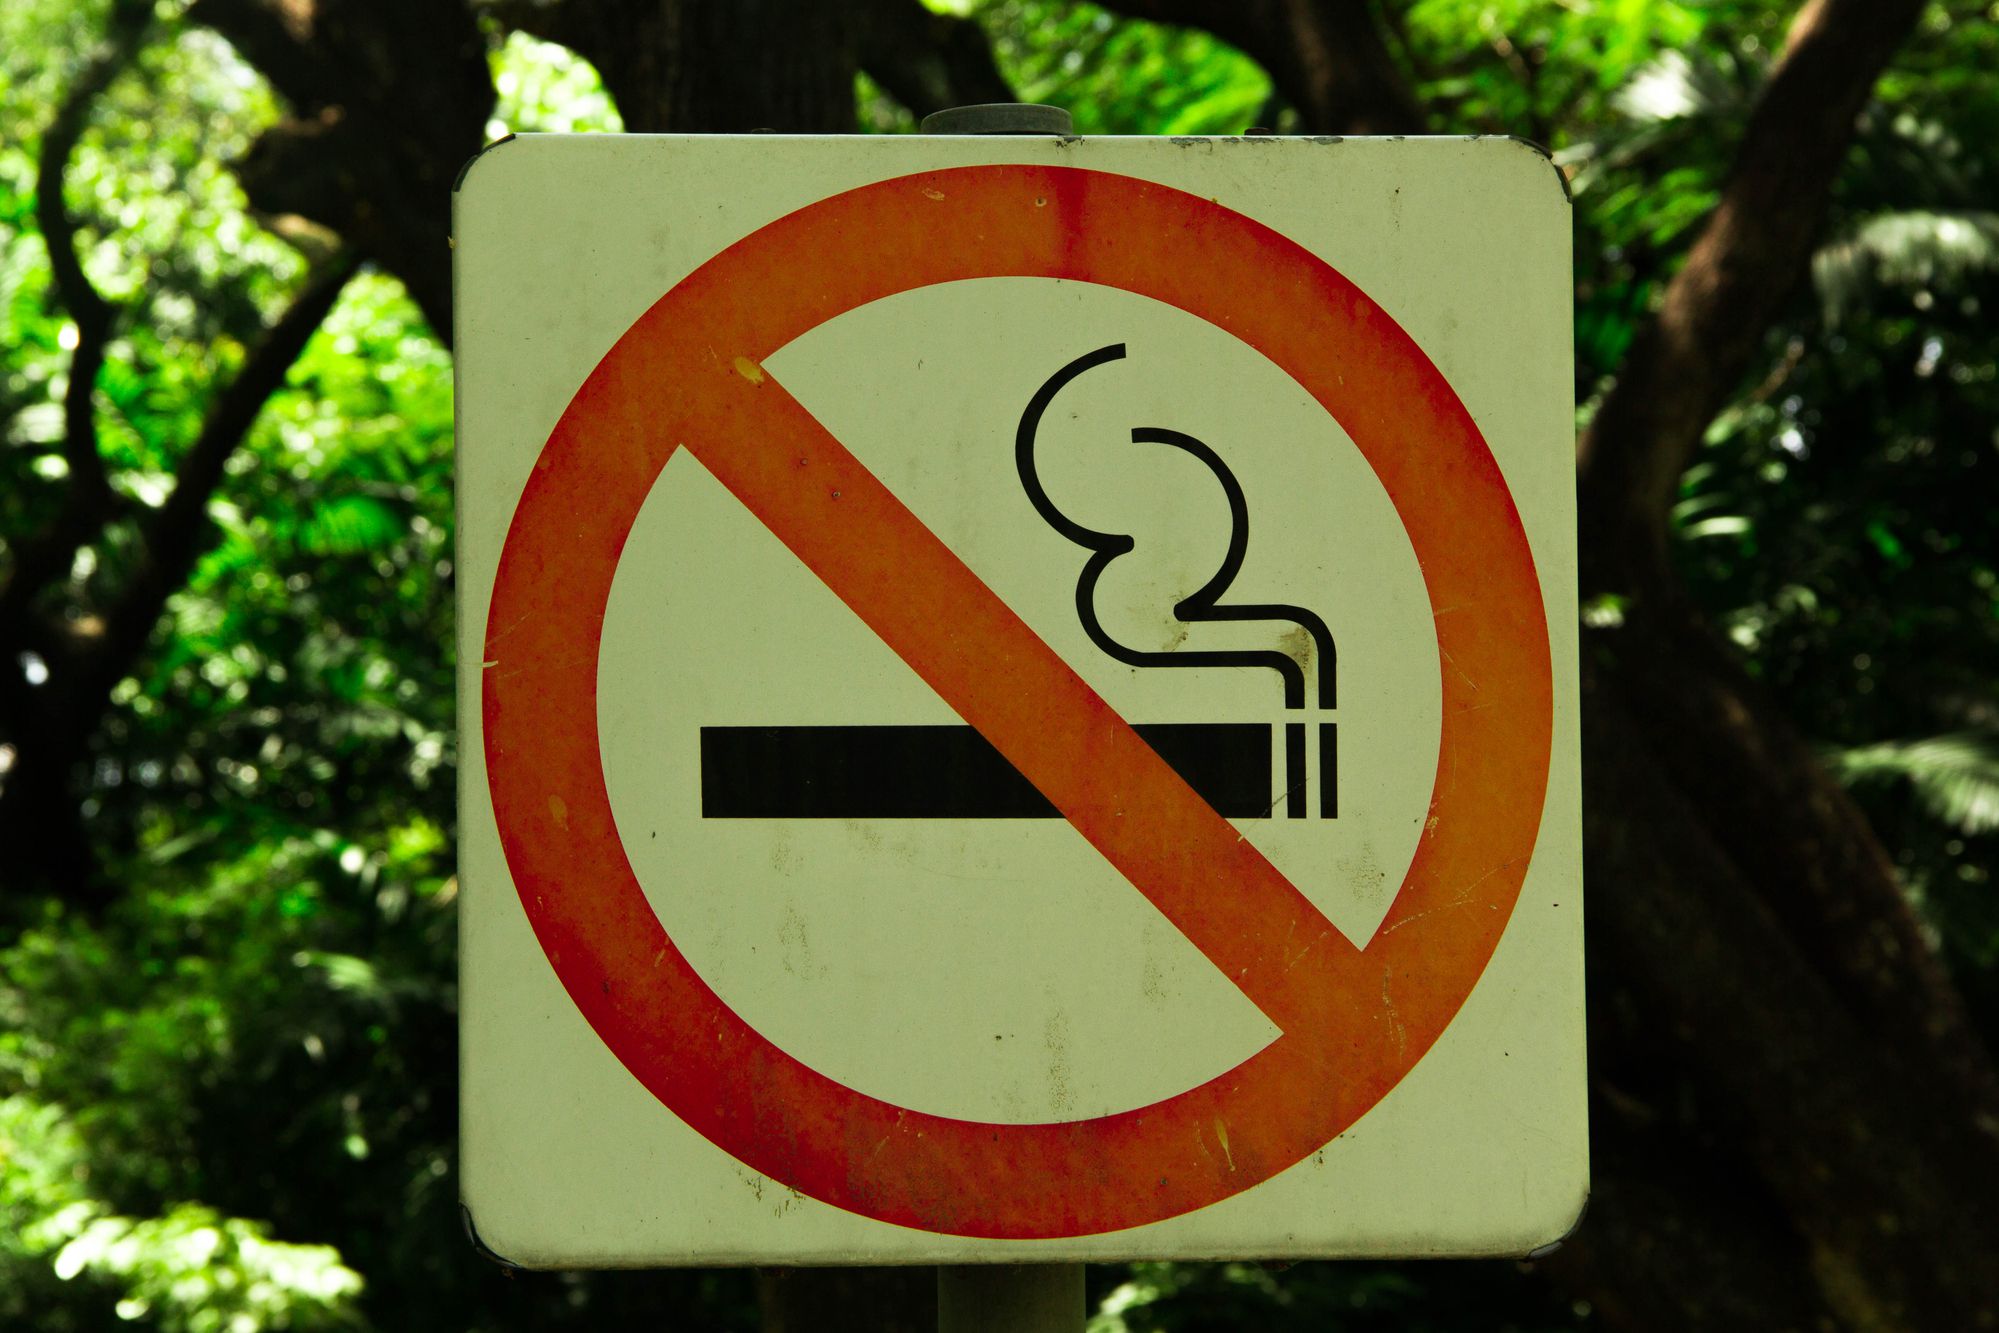 <p>Europeans visiting America will notice one thing right away: There are far fewer smokers in the U.S. and far more rigid smoking regulations than in Europe. Americans have one of the <a href="https://www.nber.org/system/files/working_papers/w12124/w12124.pdf">lowest smoking rates</a> in the developed world, with 19.1% of adult Americans smoking, as opposed to 34% of Germans and 27% of the French or English. That's a big kudos to Americans.</p>